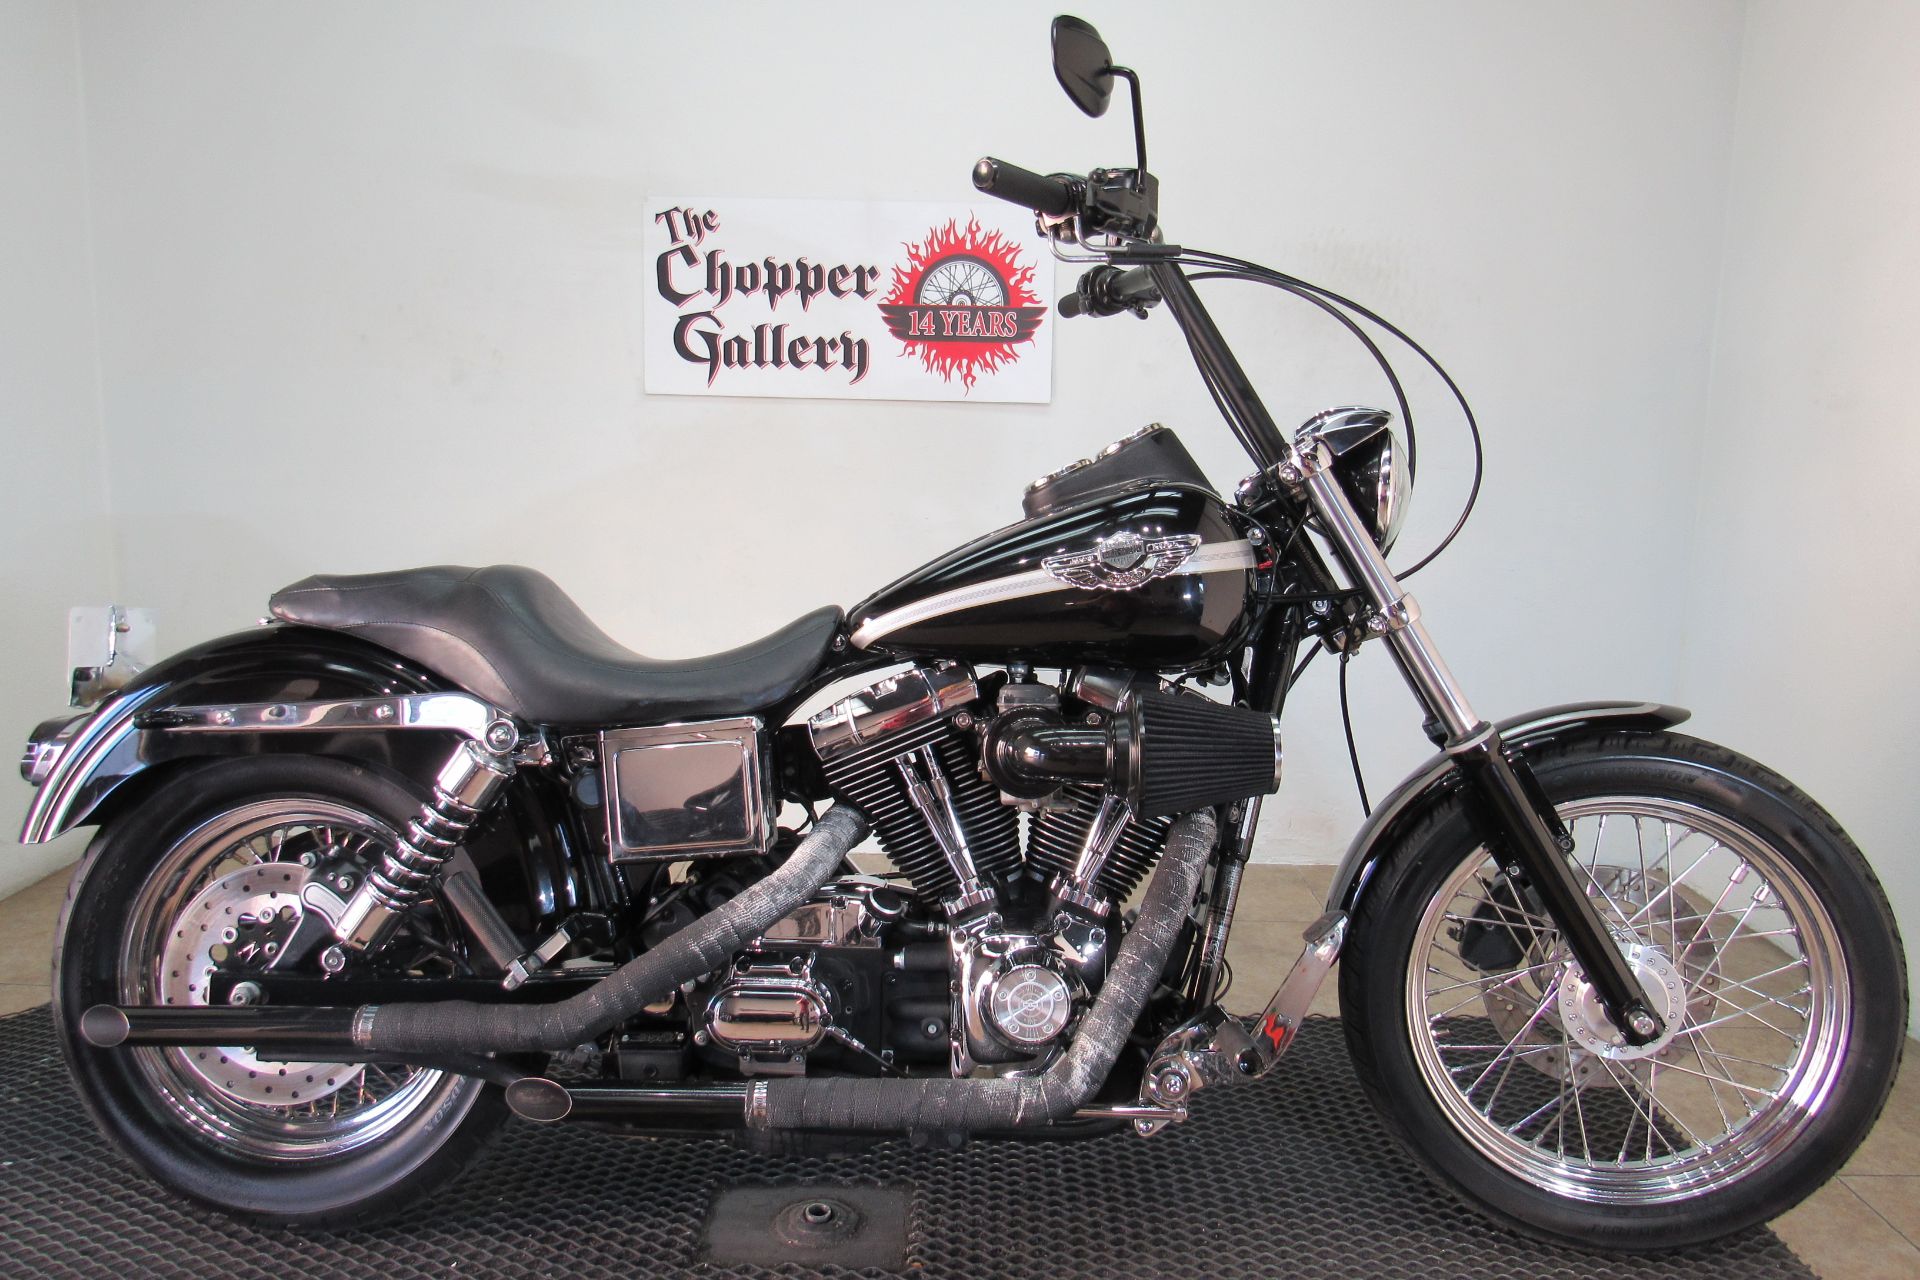 2003 Harley-Davidson FXDL Dyna Low Rider® in Temecula, California - Photo 1